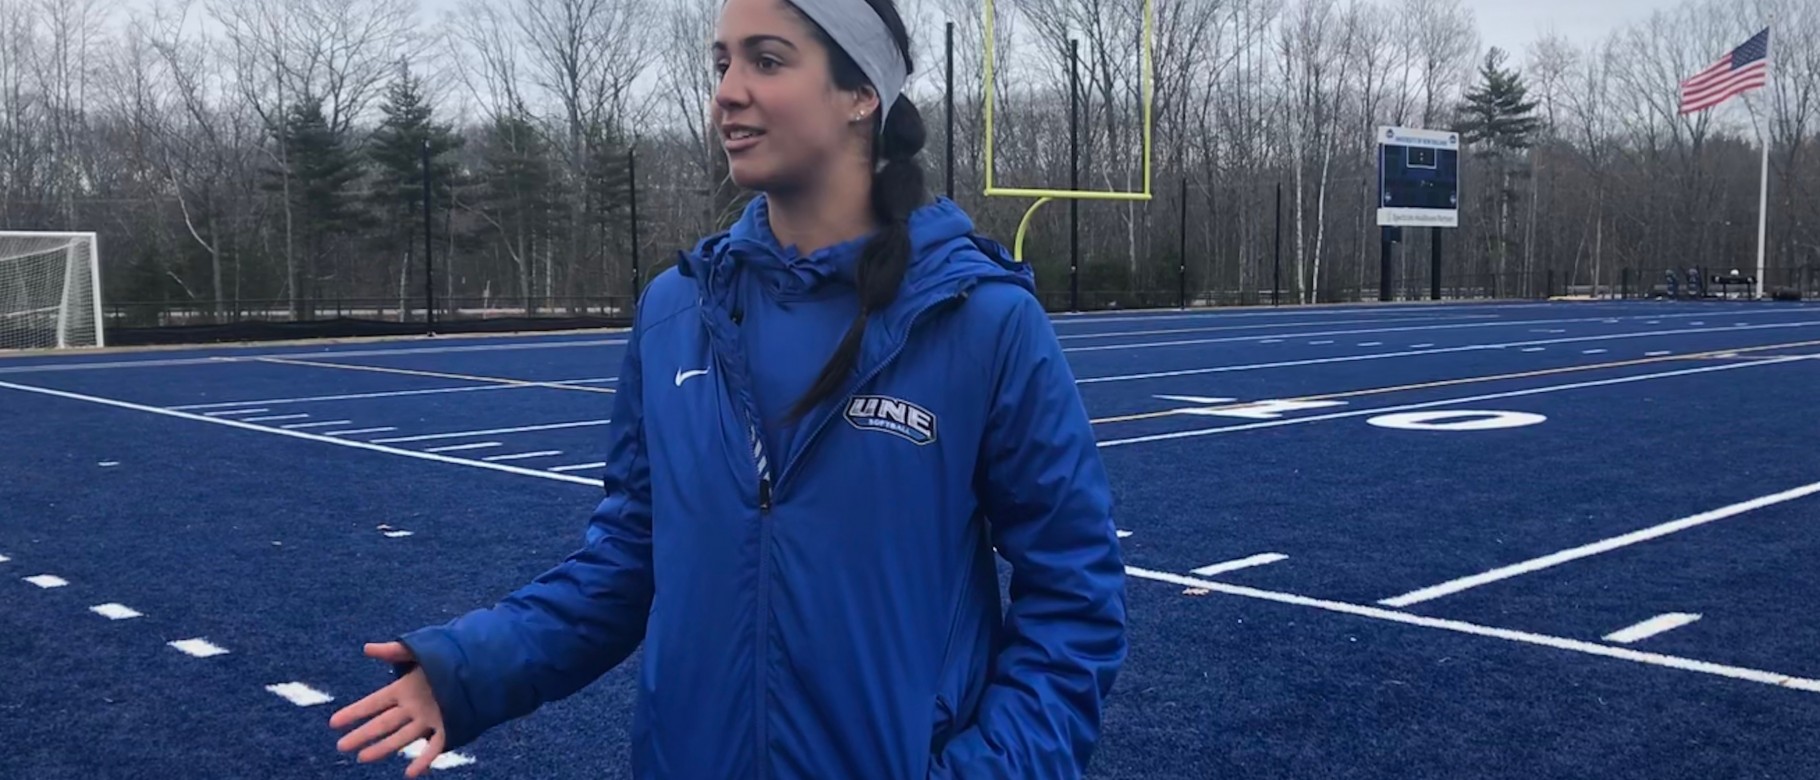 Andrea Gosper, an intern with the UNE football coaching staff, will head to Bills' training camp in July